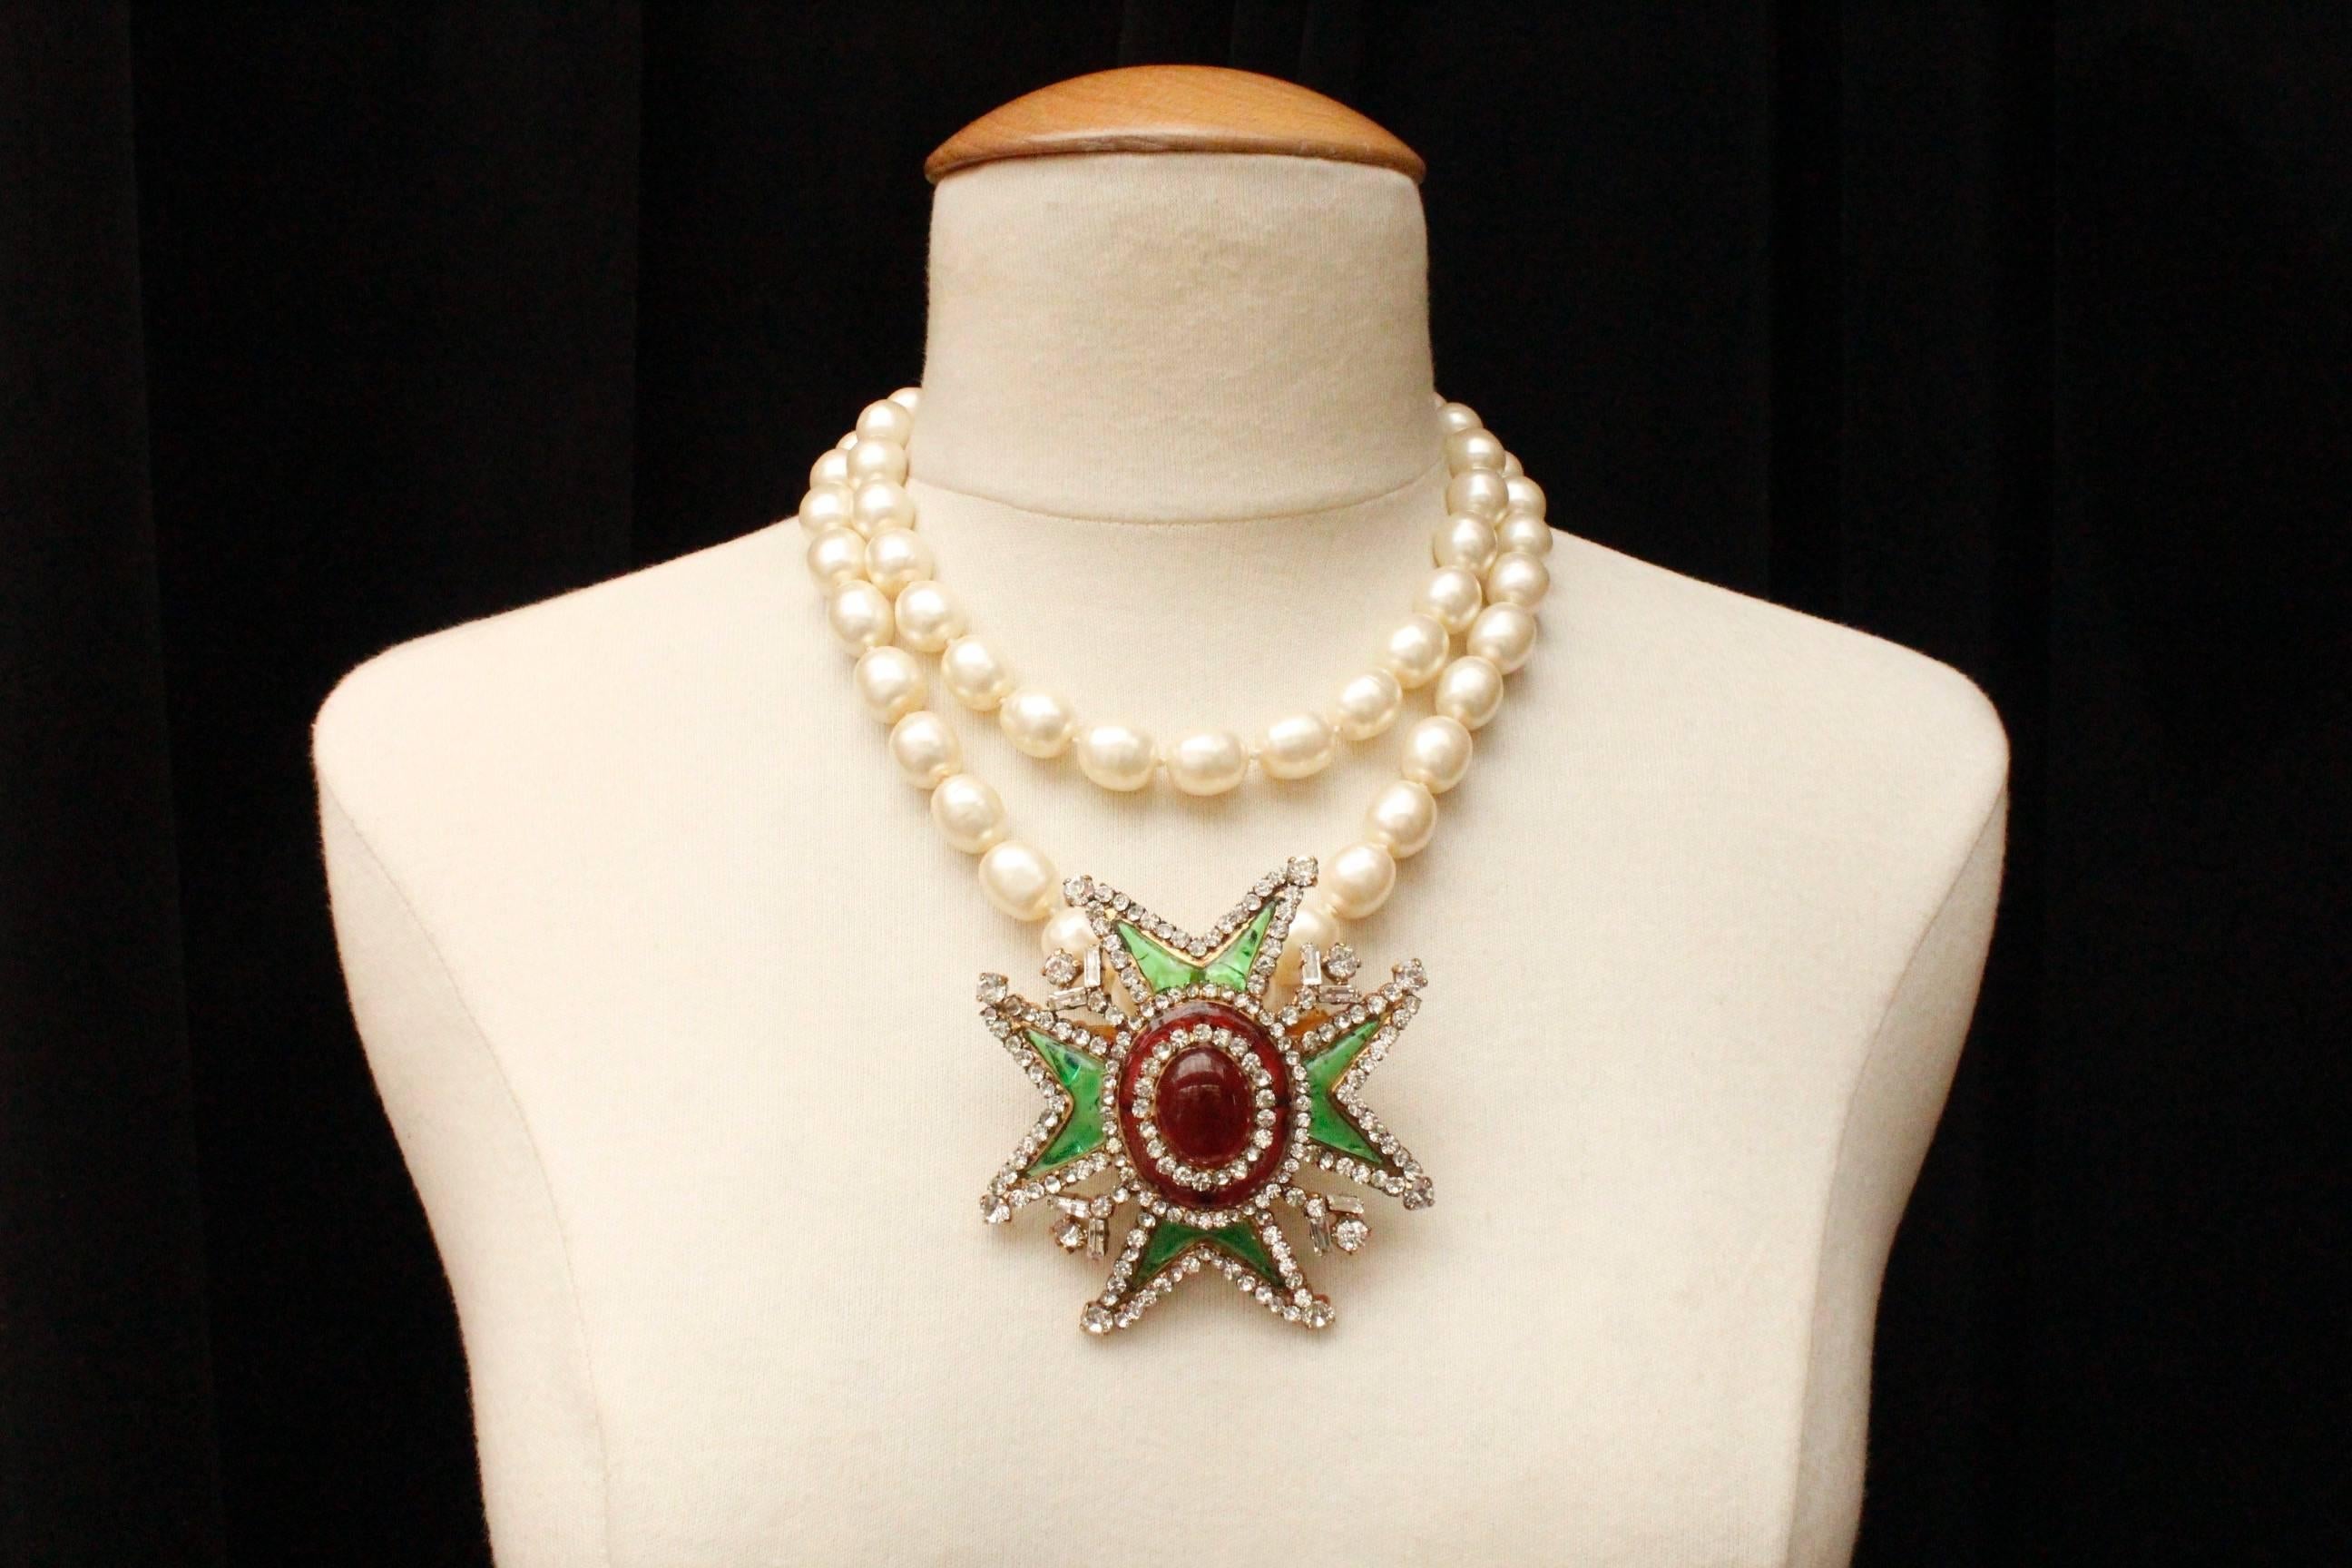 CHANEL (Made in France) Long necklace composed of knot mounted baroque faux-pearl  and a pendant representing a Maltese cross. The gilded metal pendant is paved with Swarovski crystals and ruby and emerald poured glass paste. The pendant can be worn